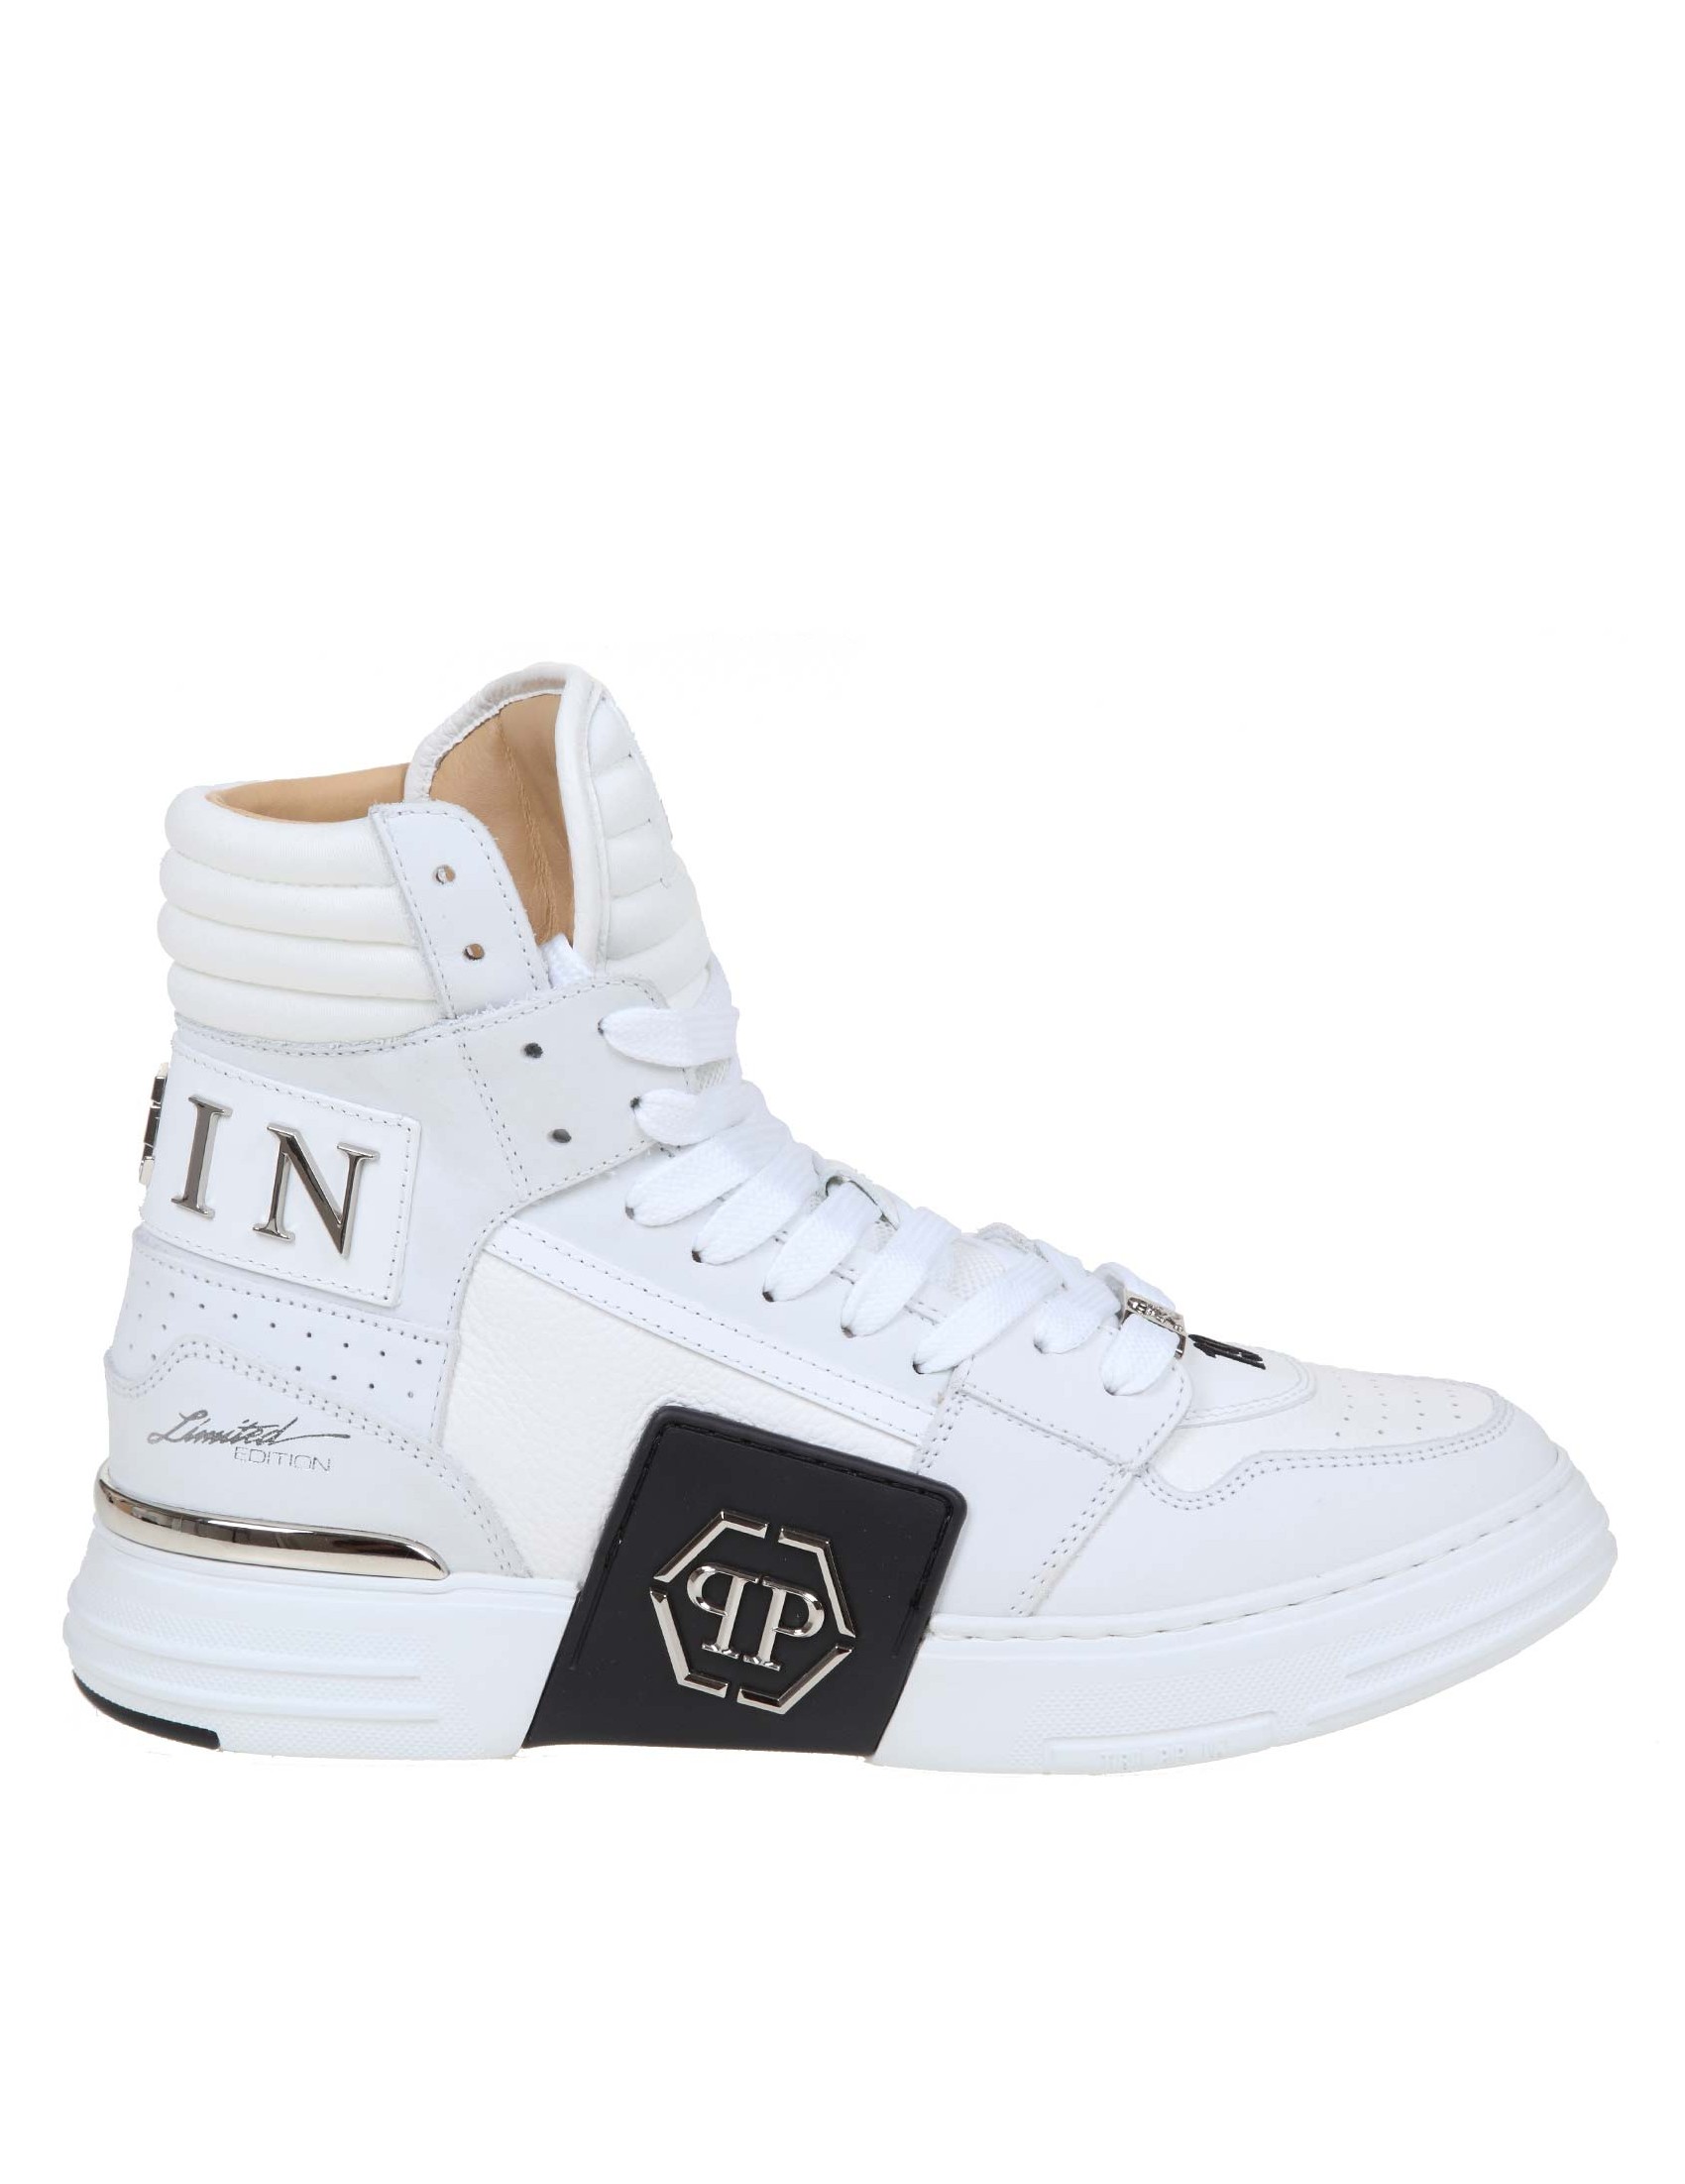 PHILIPP PLEIN SNAEKERS MAN HI-TOP WHITE LEATHER LIMITED EDITION